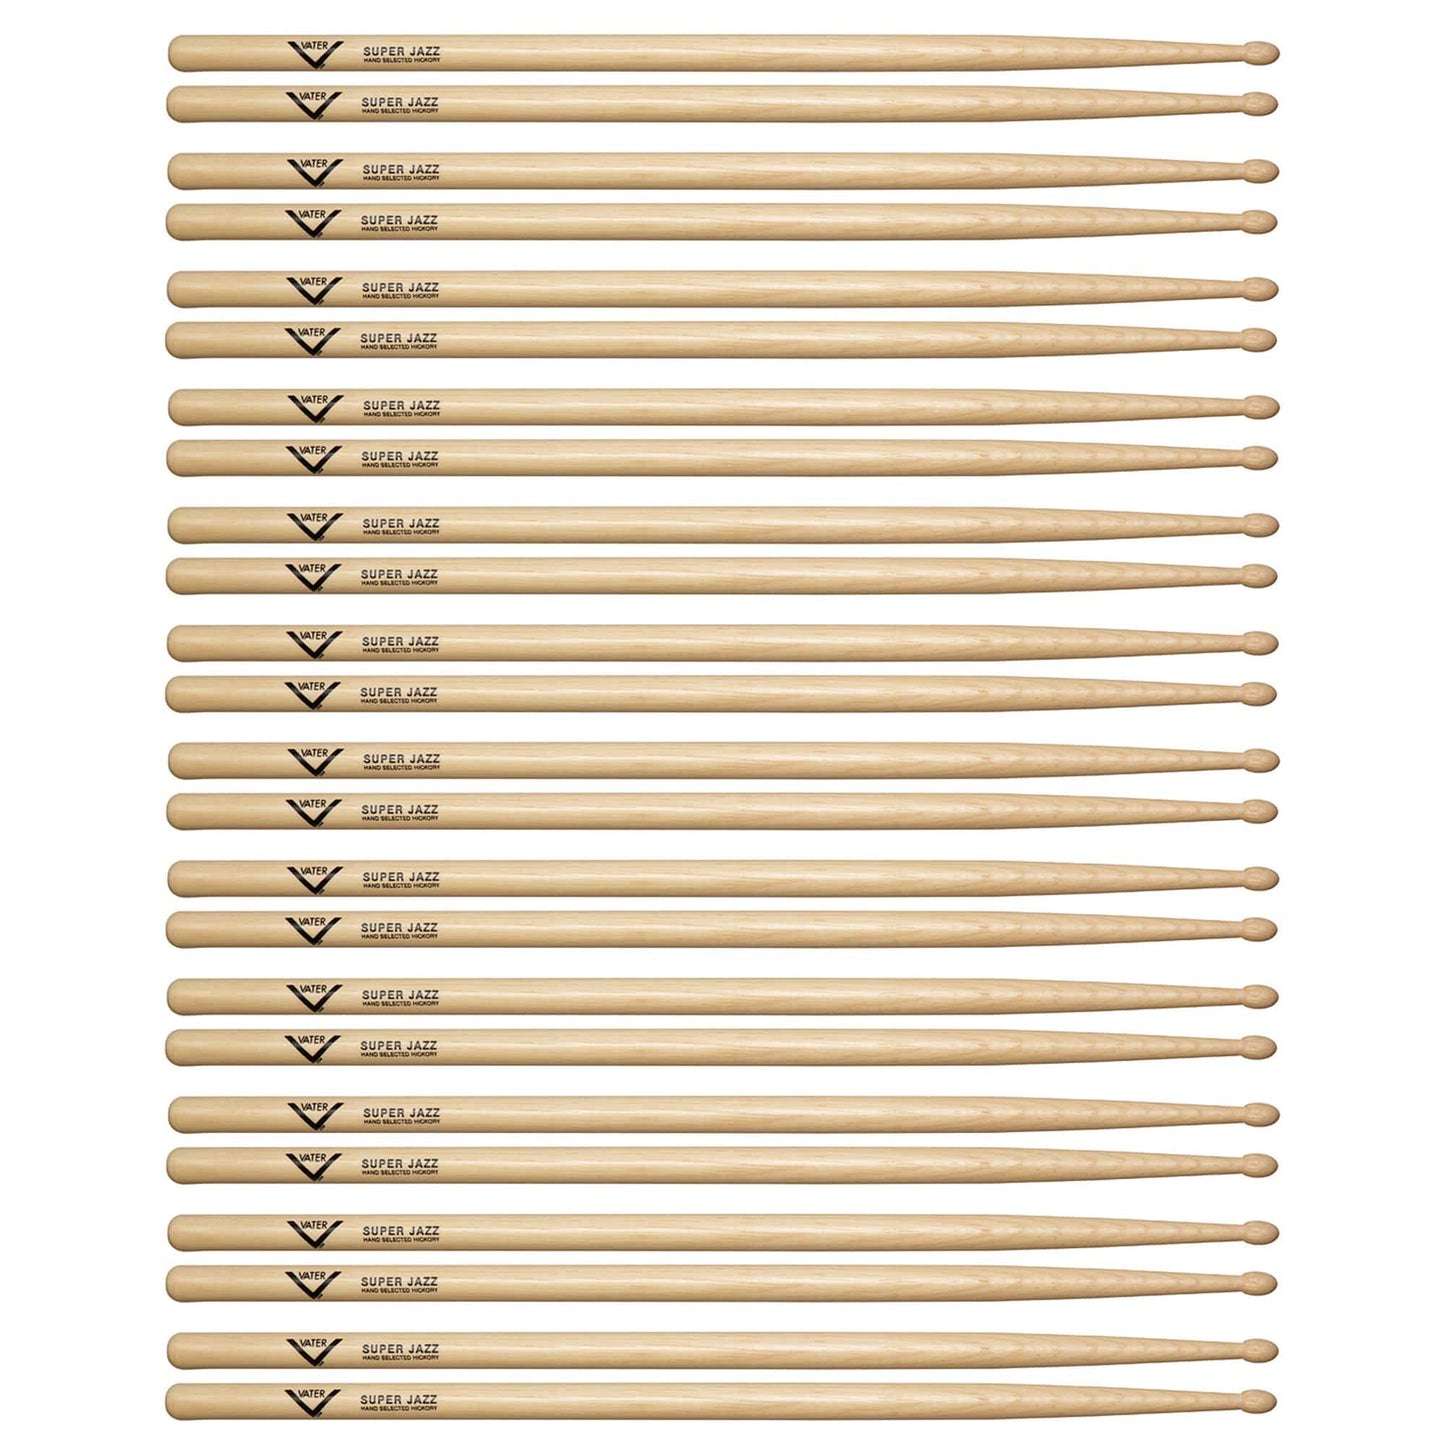 Vater Hickory Super Jazz Wood Tip Drum Sticks (12 Pair Bundle) Drums and Percussion / Parts and Accessories / Drum Sticks and Mallets